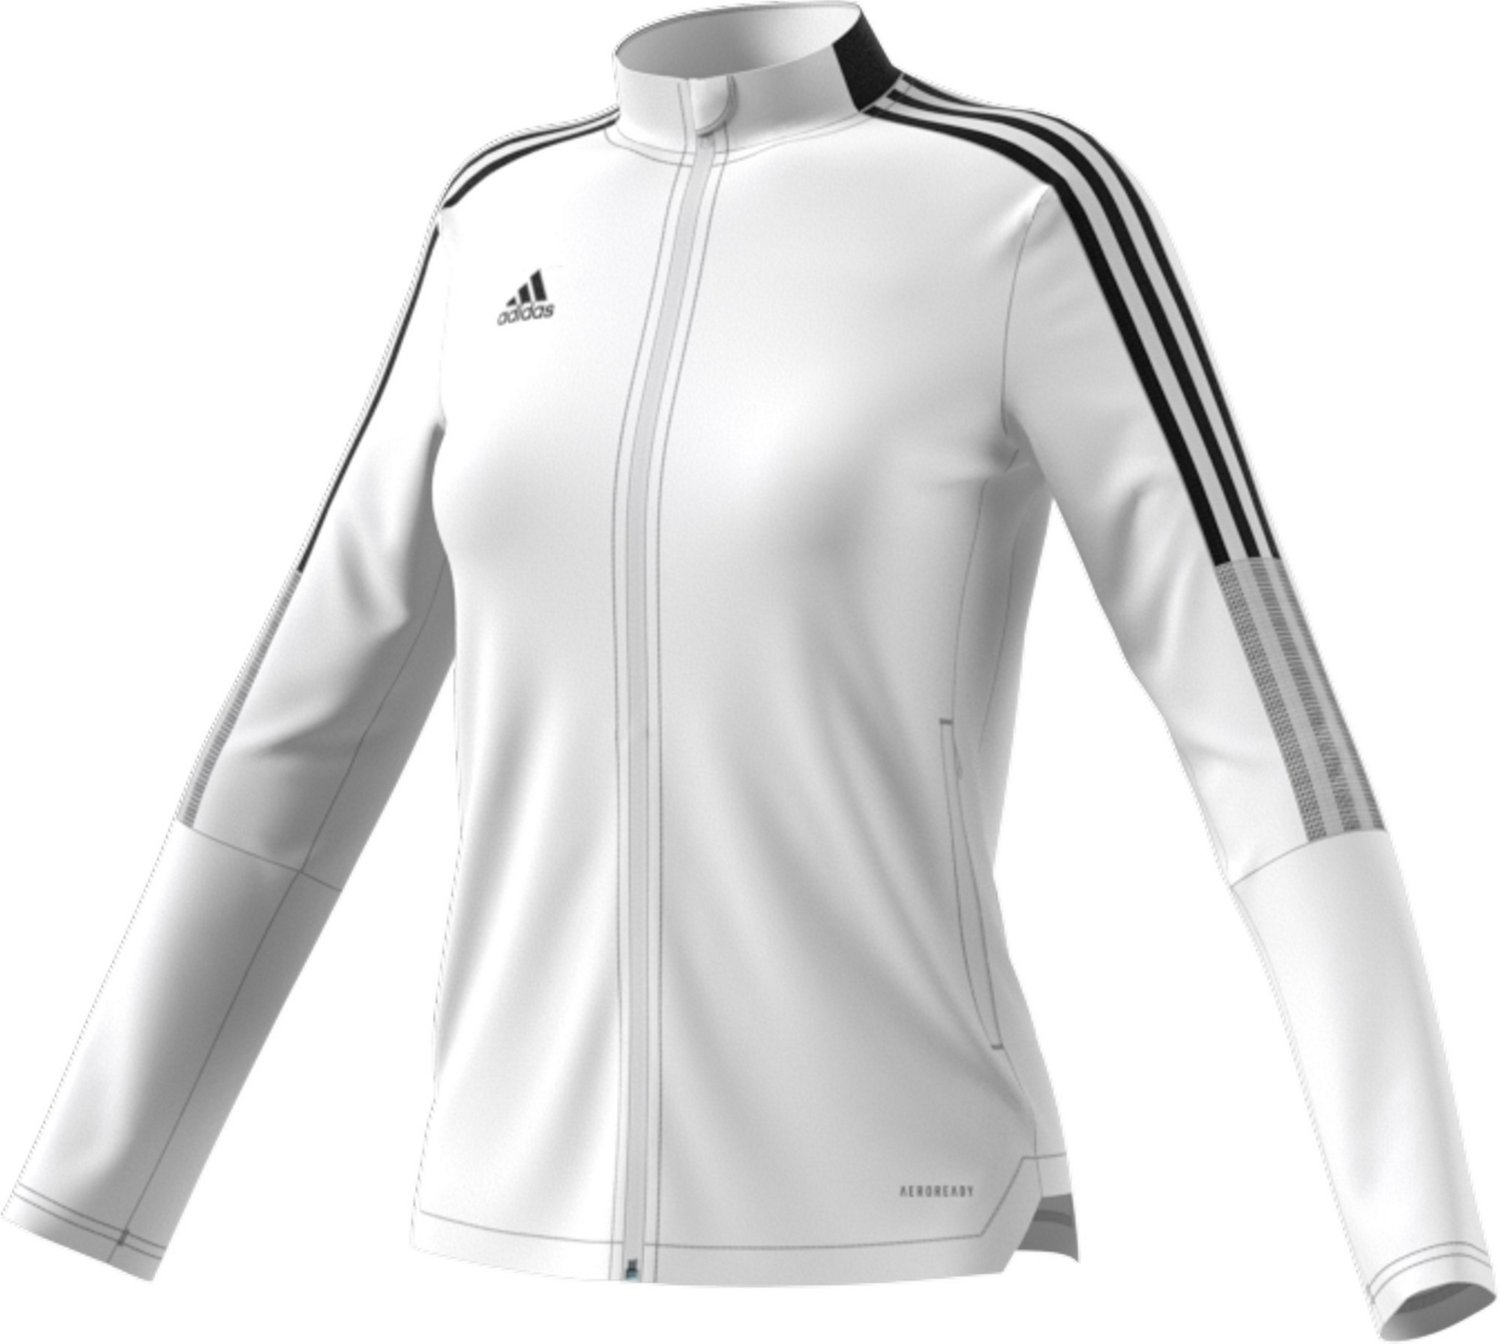 Search Results - Black and white adidas jacket | Academy